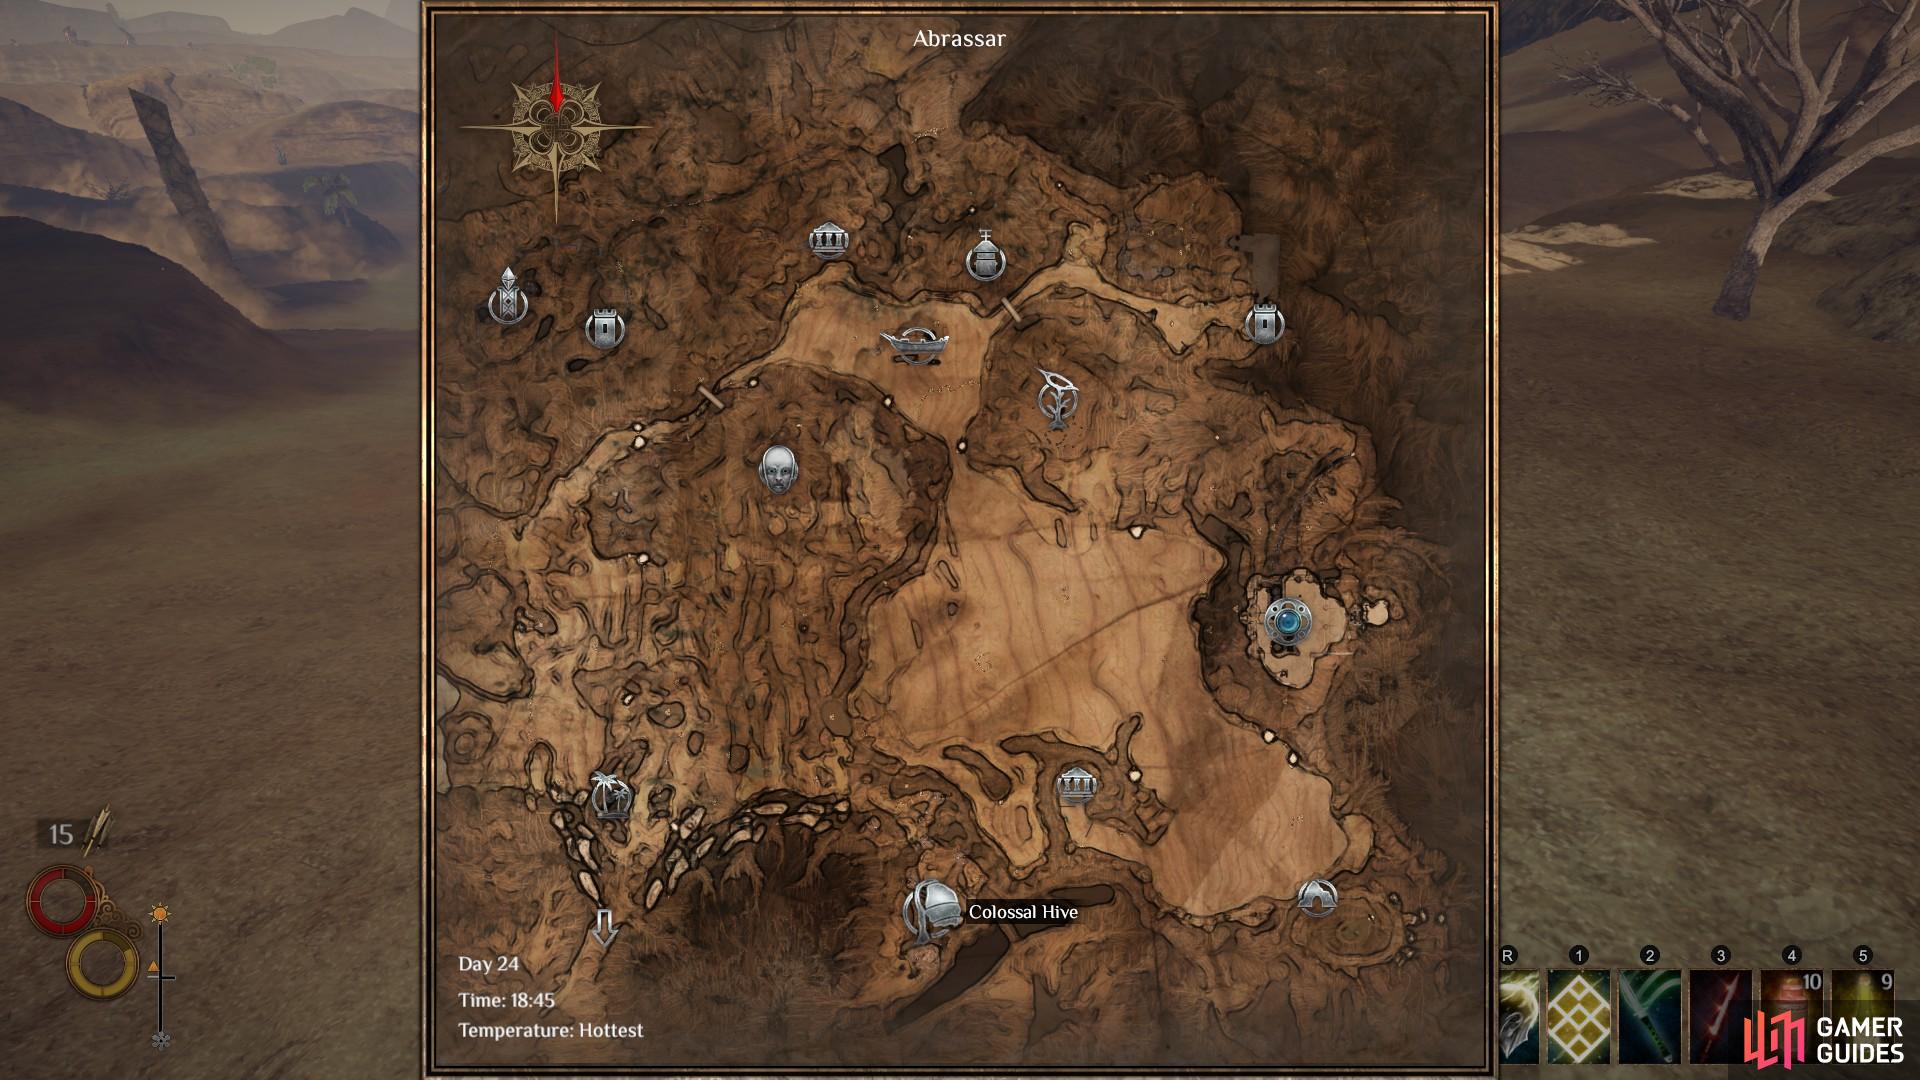 The location of the Colossal Hive, south west of Levant, on the Abrassar regional map.